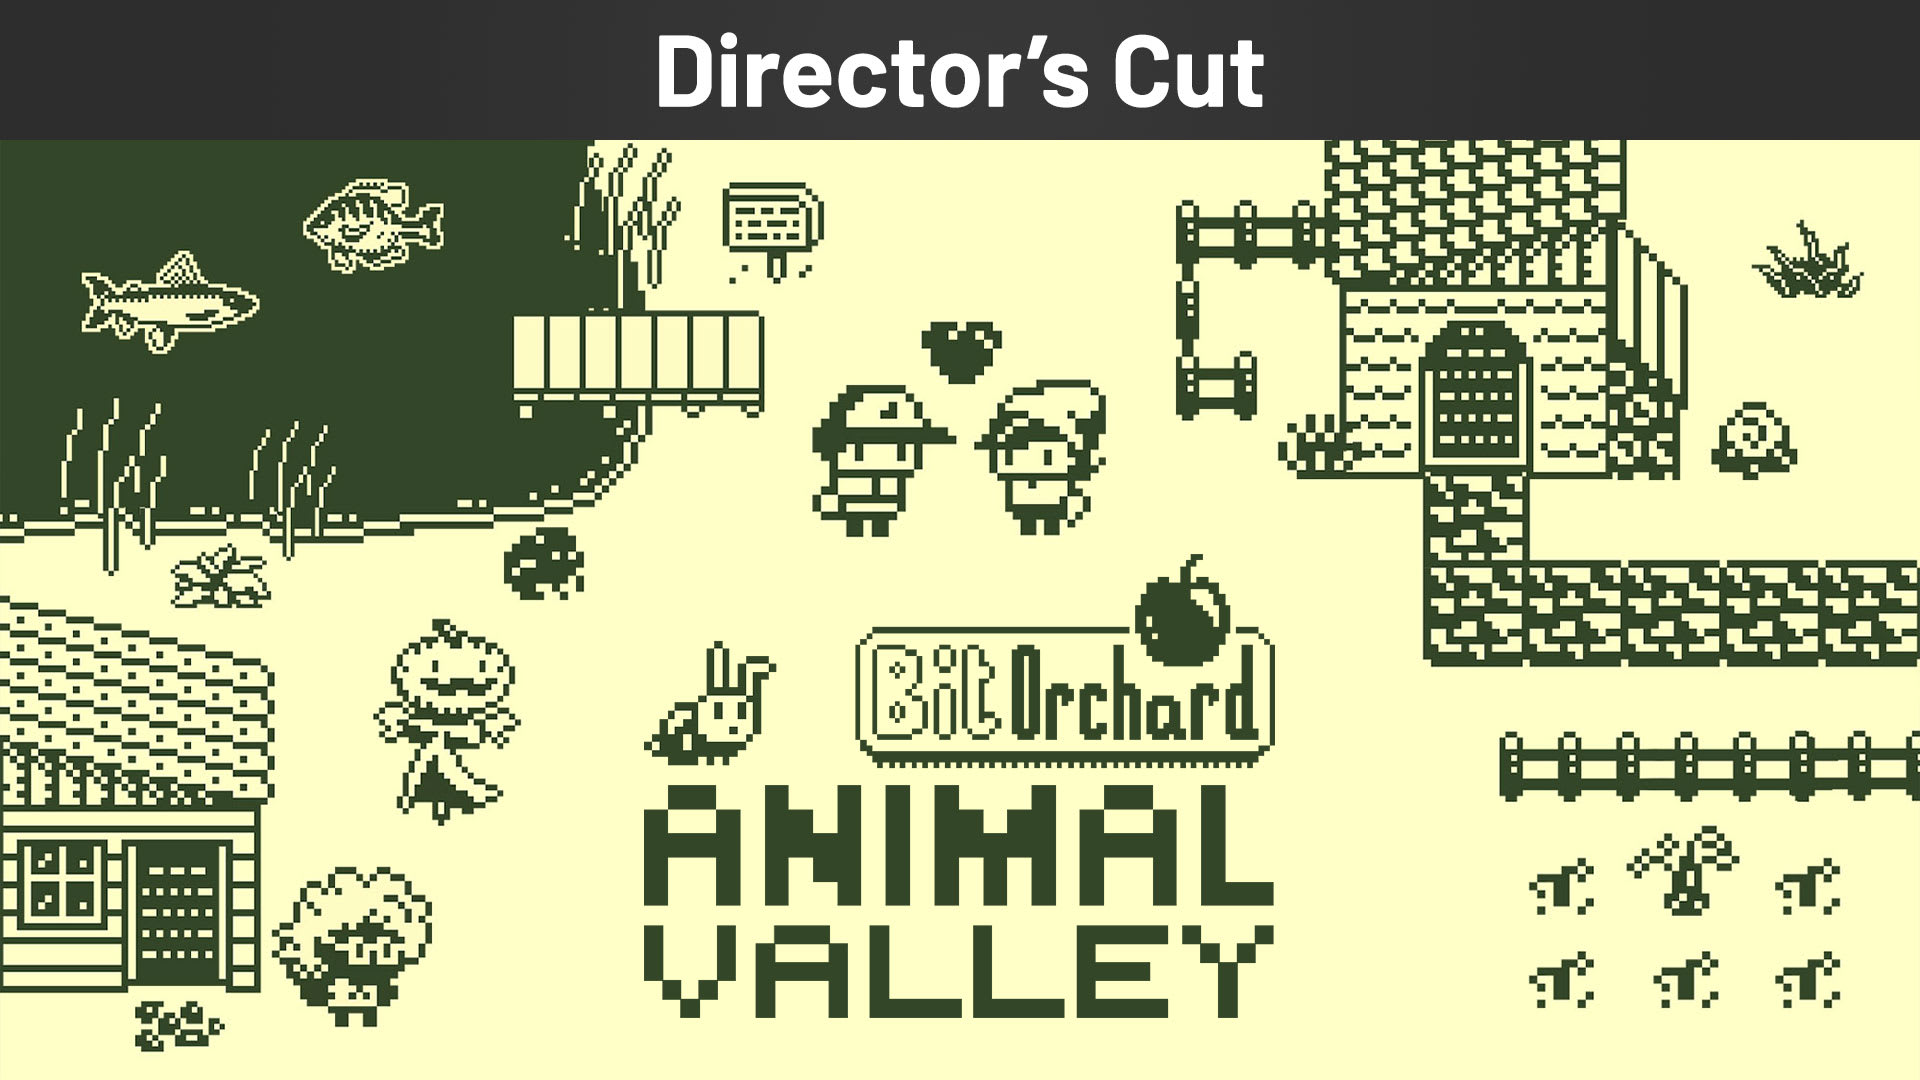 Bit Orchard: Animal Valley Director's Cut 1